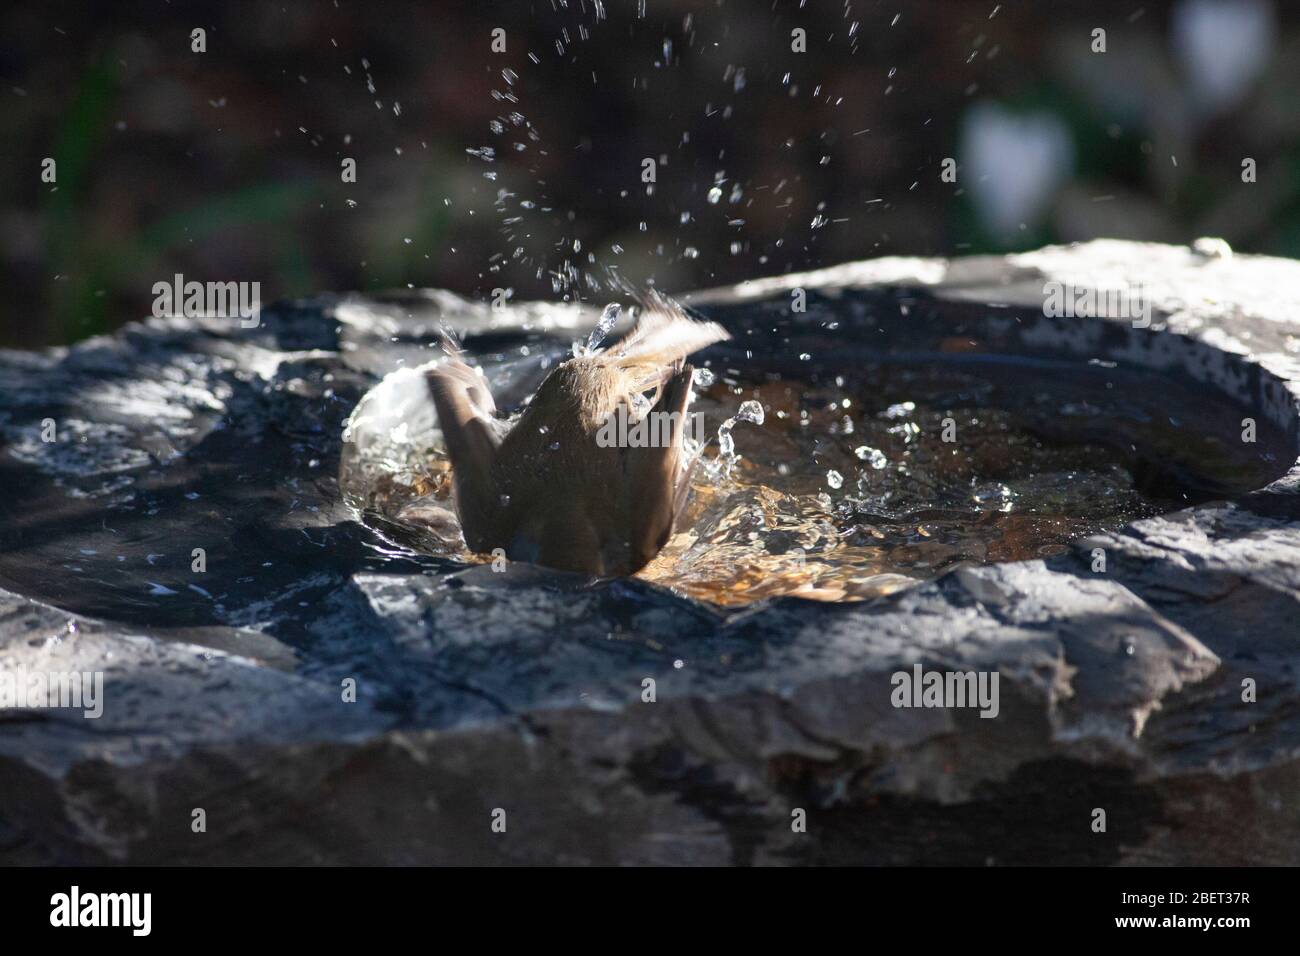 London, UK. 15th Apr, 2020. a robin enjoys the sunshine as it splashes in the water of a slate birdbath in a garden in Clapham, south London. Credit: Anna Watson/Alamy Live News Stock Photo